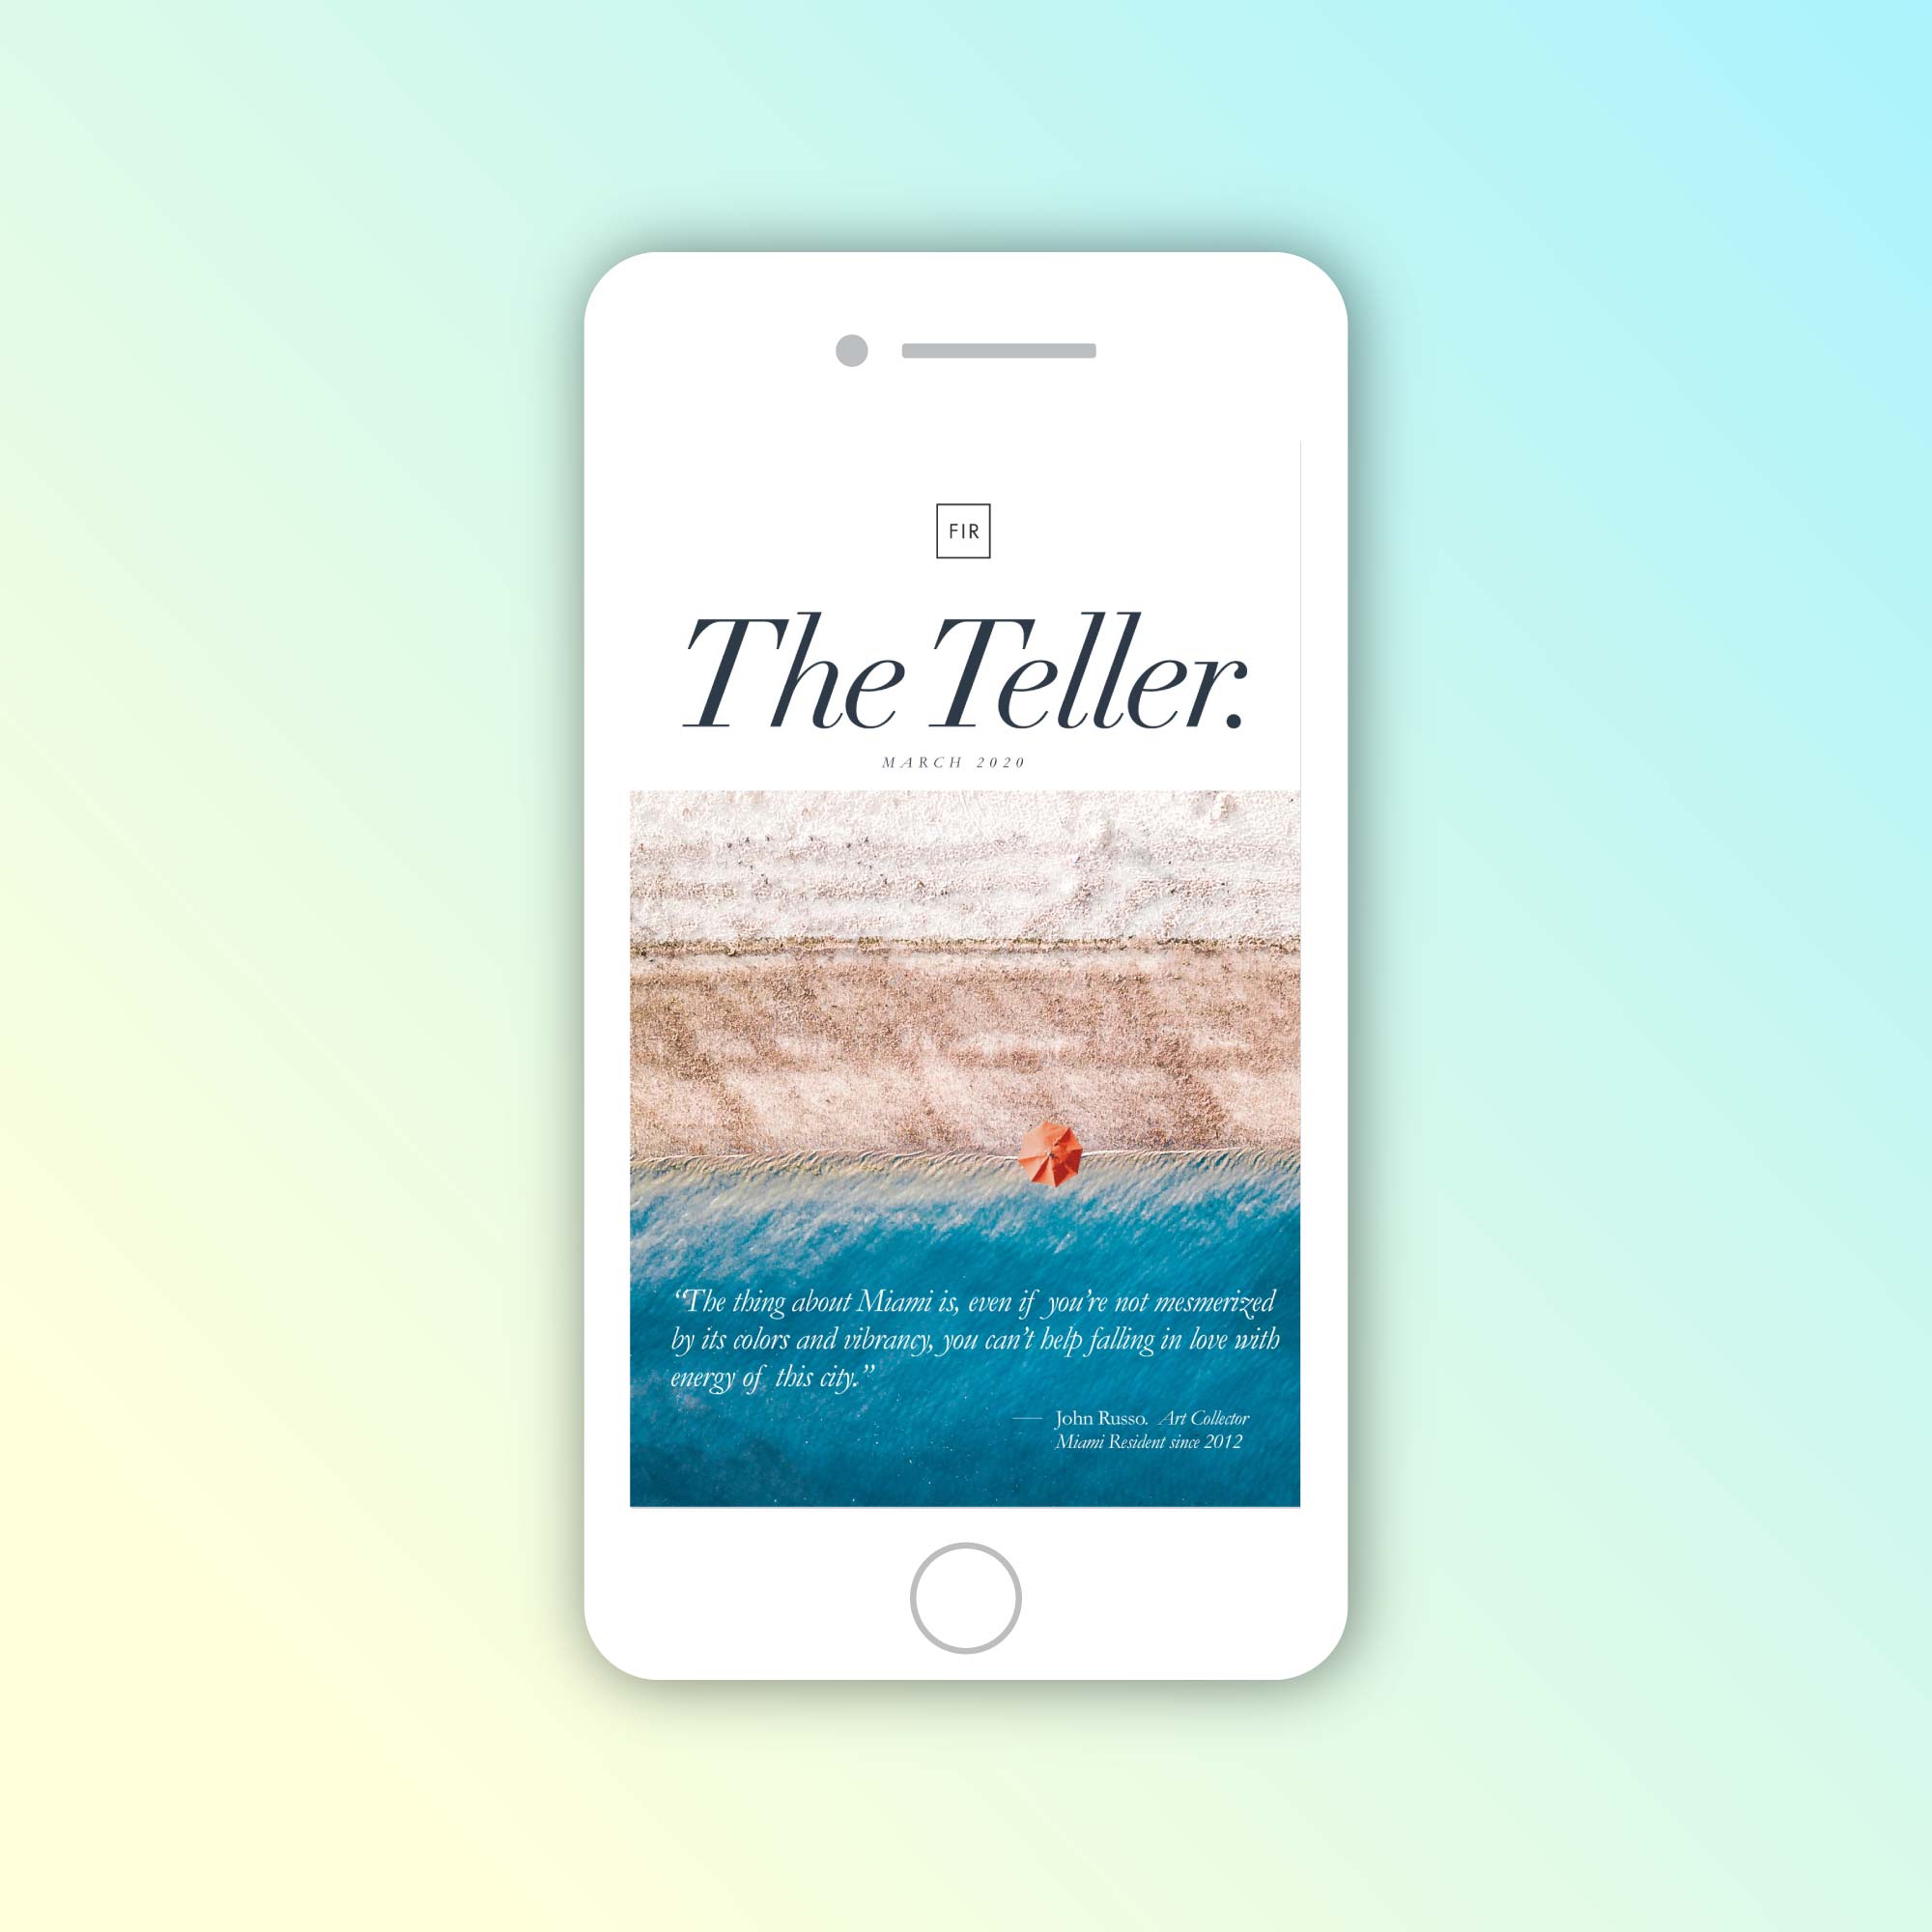 Email newsletter mockup on the phone